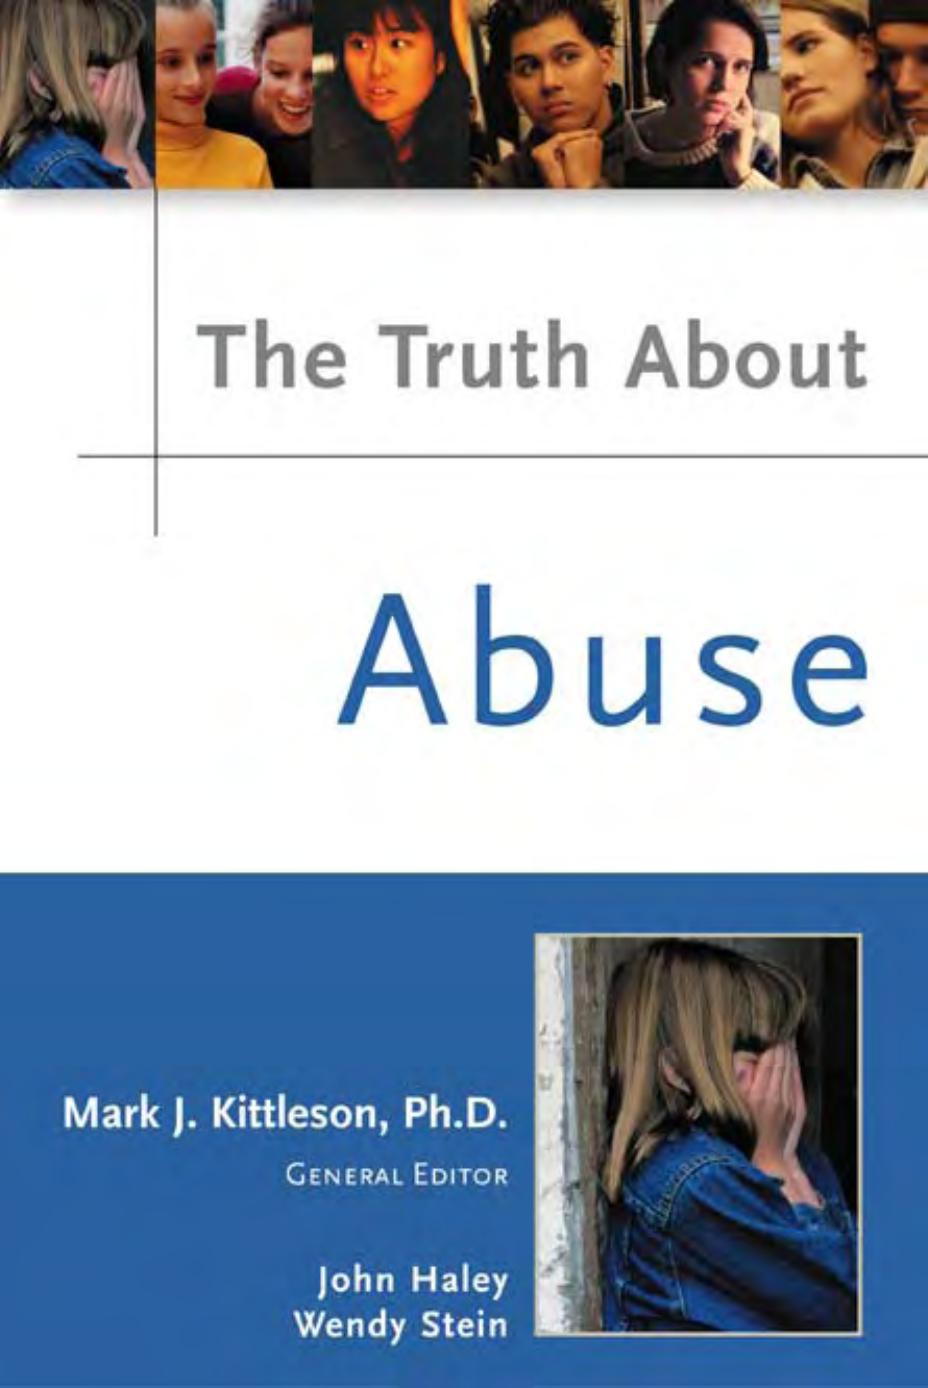 The Truth About Abuse